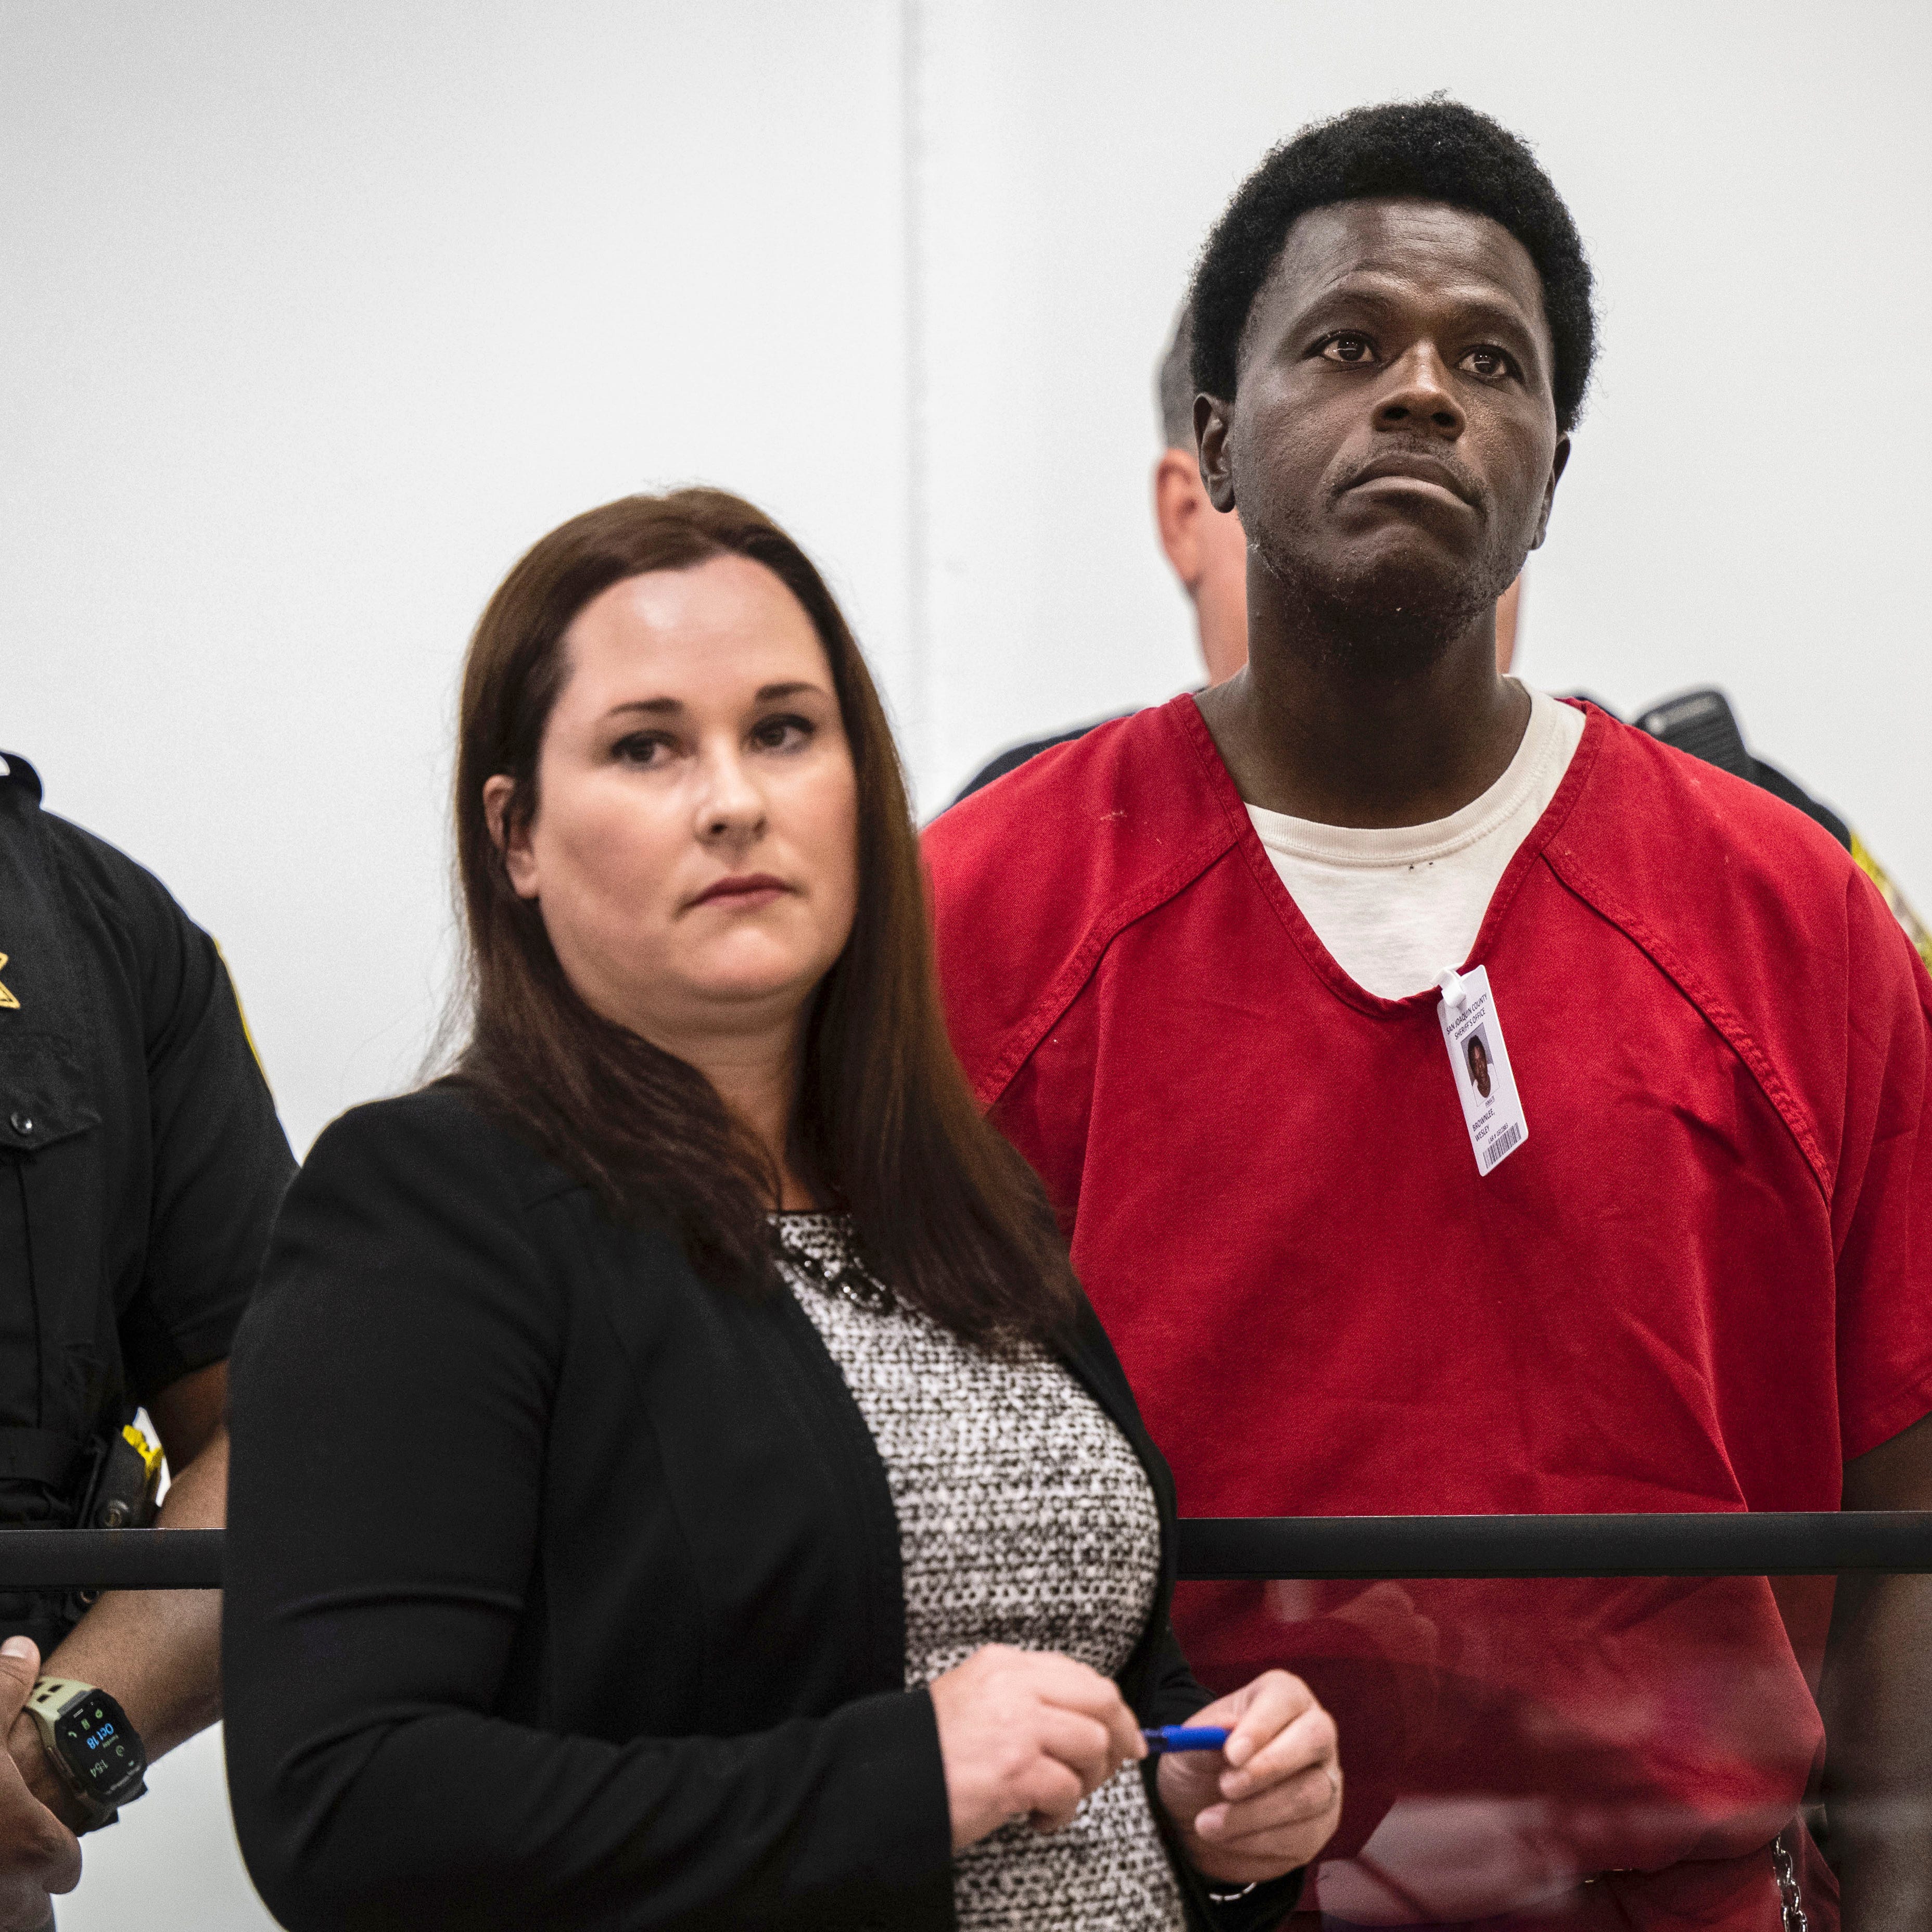 Wesley Brownlee stands with public defender Allison Nobert during his arraignment in San Joaquin County Superior Court. Brownlee has been charged in four additional slayings this week, bringing his total to seven deaths in Northern California since April 2021, authorities said.